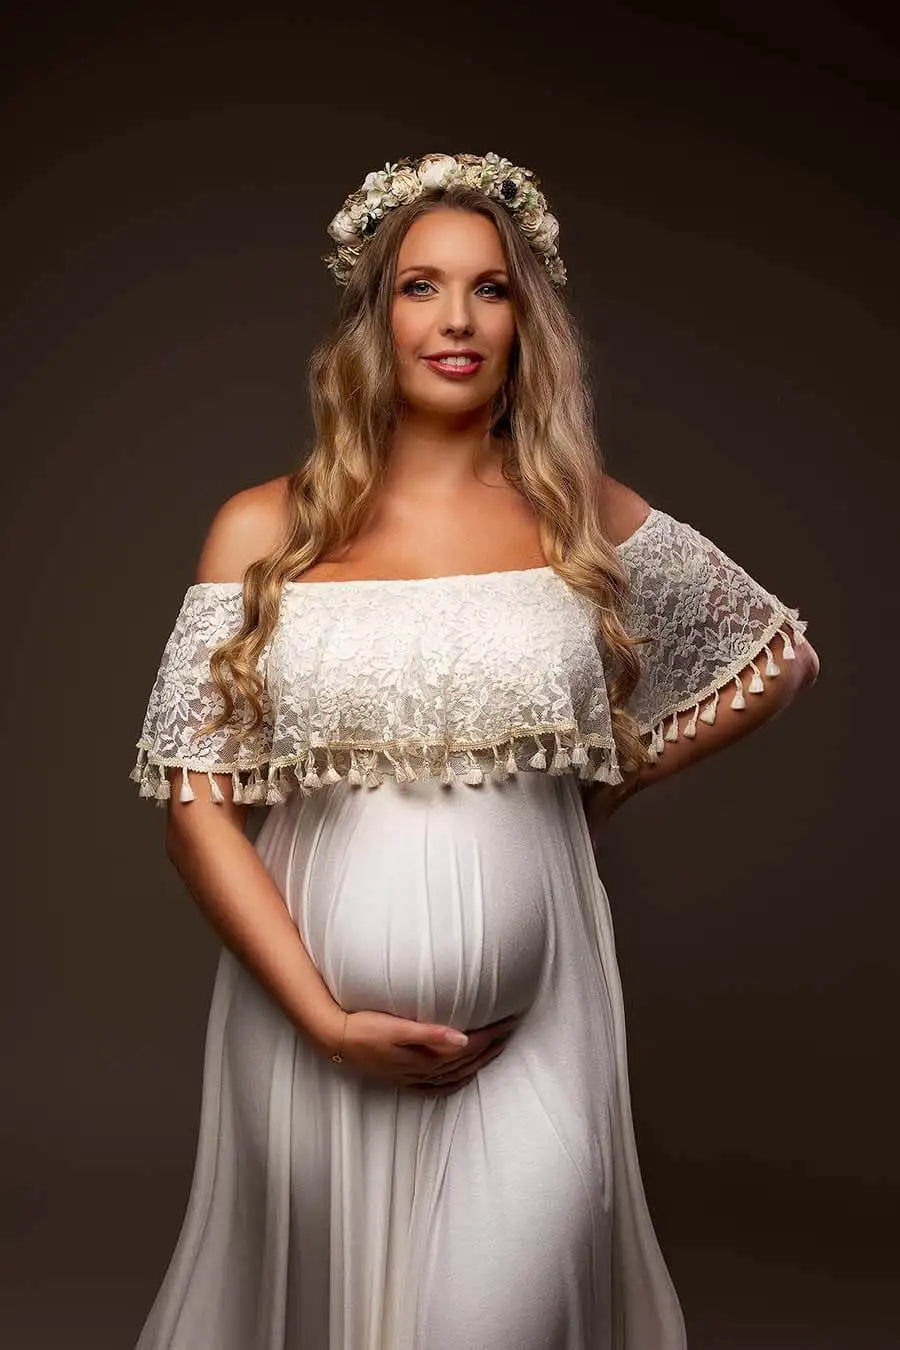 Pregnant Woman Dress For Photography